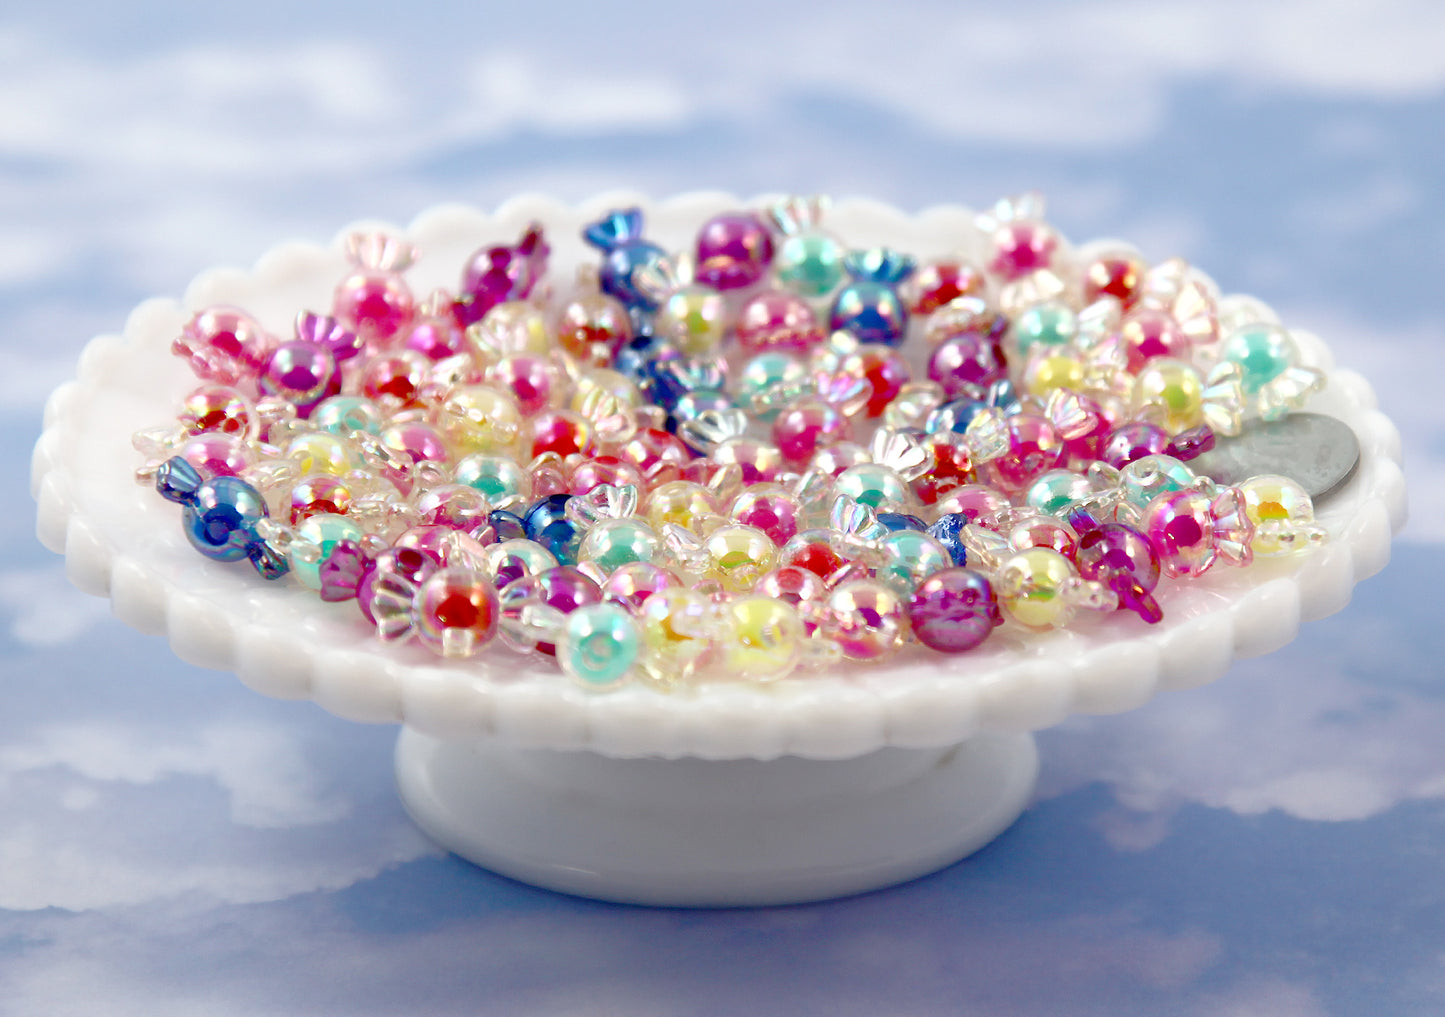 Candy Beads - 12mm AB Tiny Candy Shape Acrylic or Resin Beads - 35 pc set